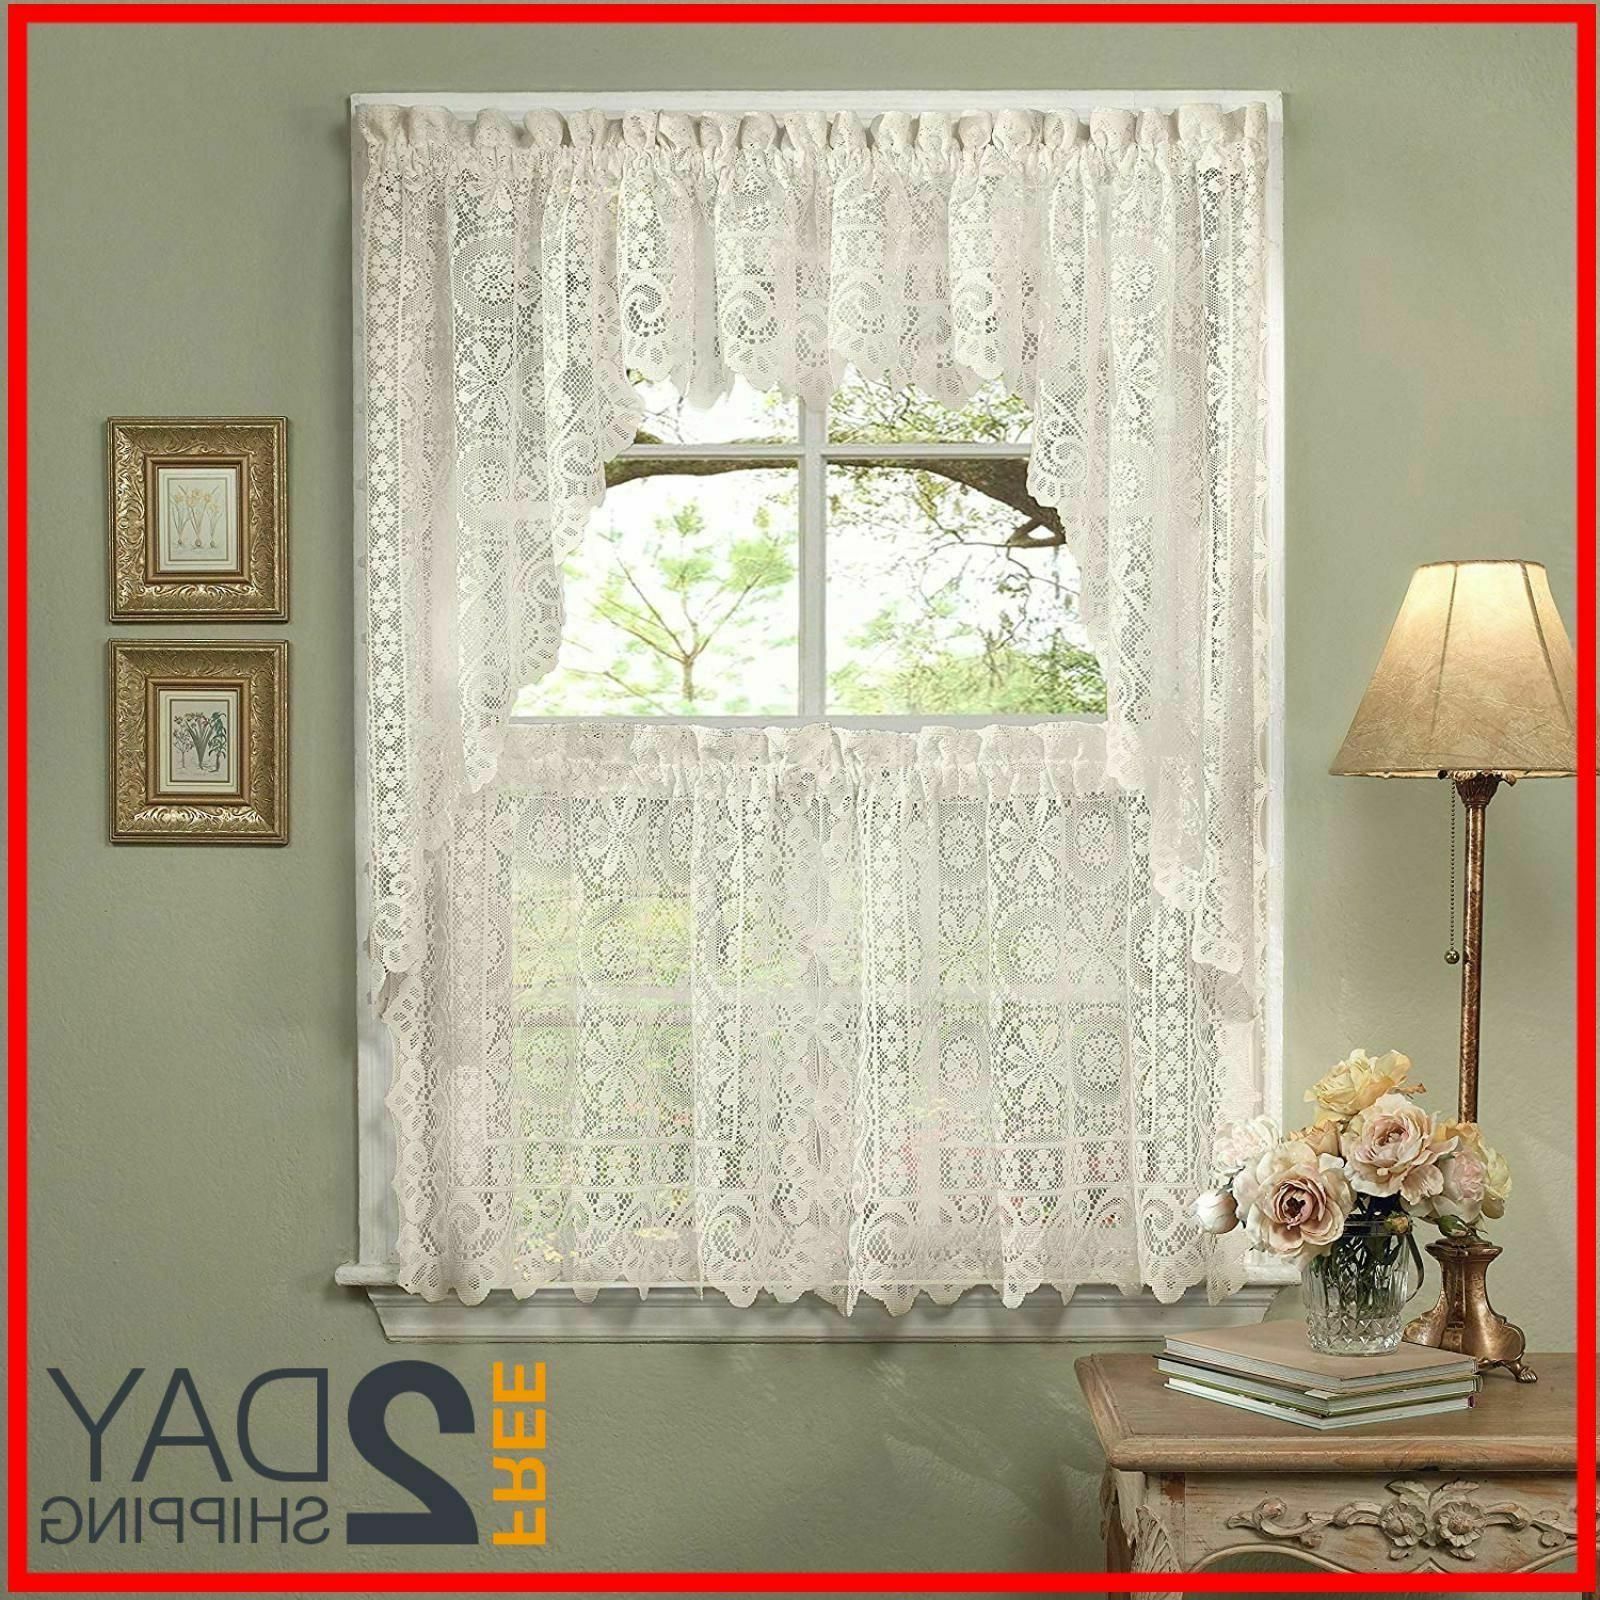 5 Pc Kitchen Curtain Set, Swag Pair, Val Regarding Embroidered &#039;coffee Cup&#039; 5 Piece Kitchen Curtain Sets (View 7 of 20)